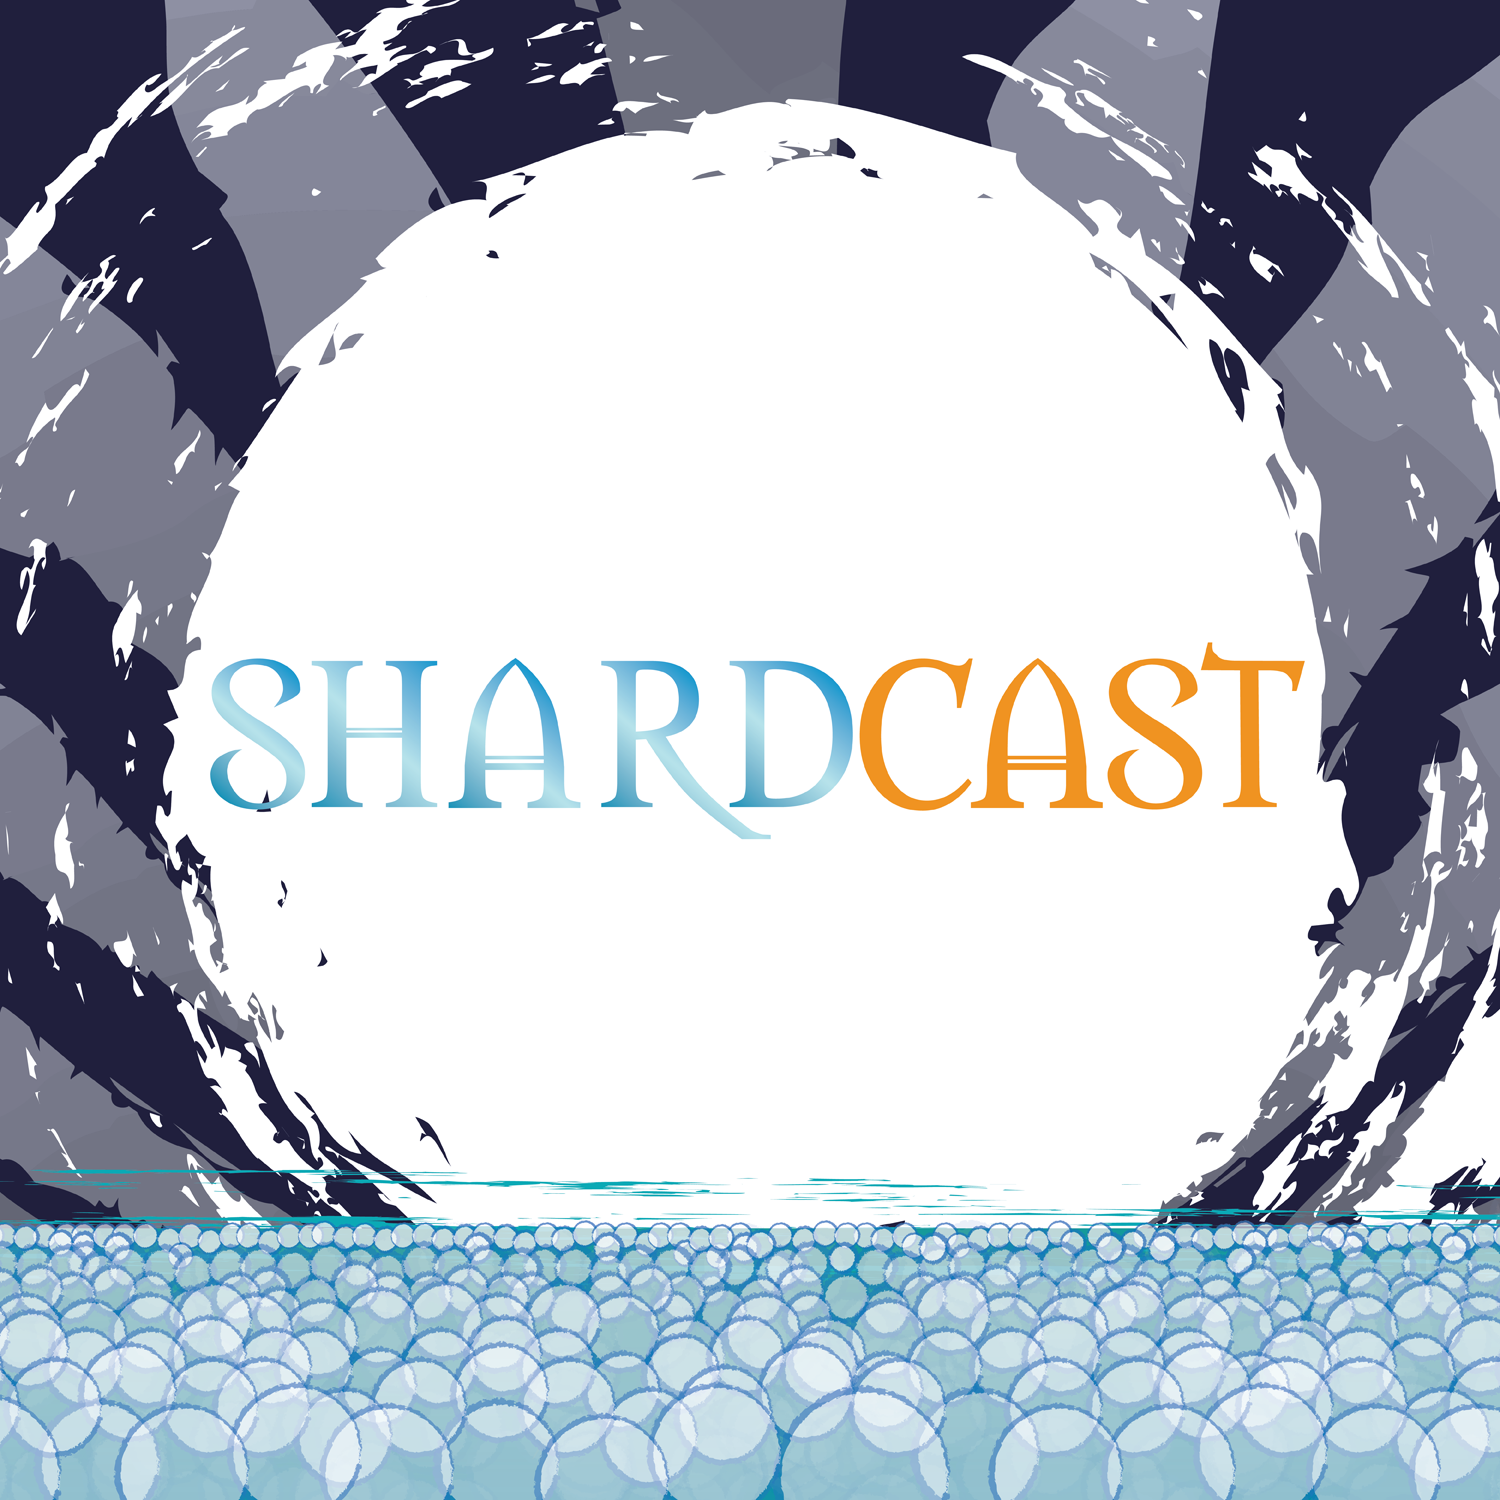 More information about "Shardcast: Blowing Up the Selish Cognitive Realm, Avatars Definition, and More! Q2 2021 WoBs Part 1"